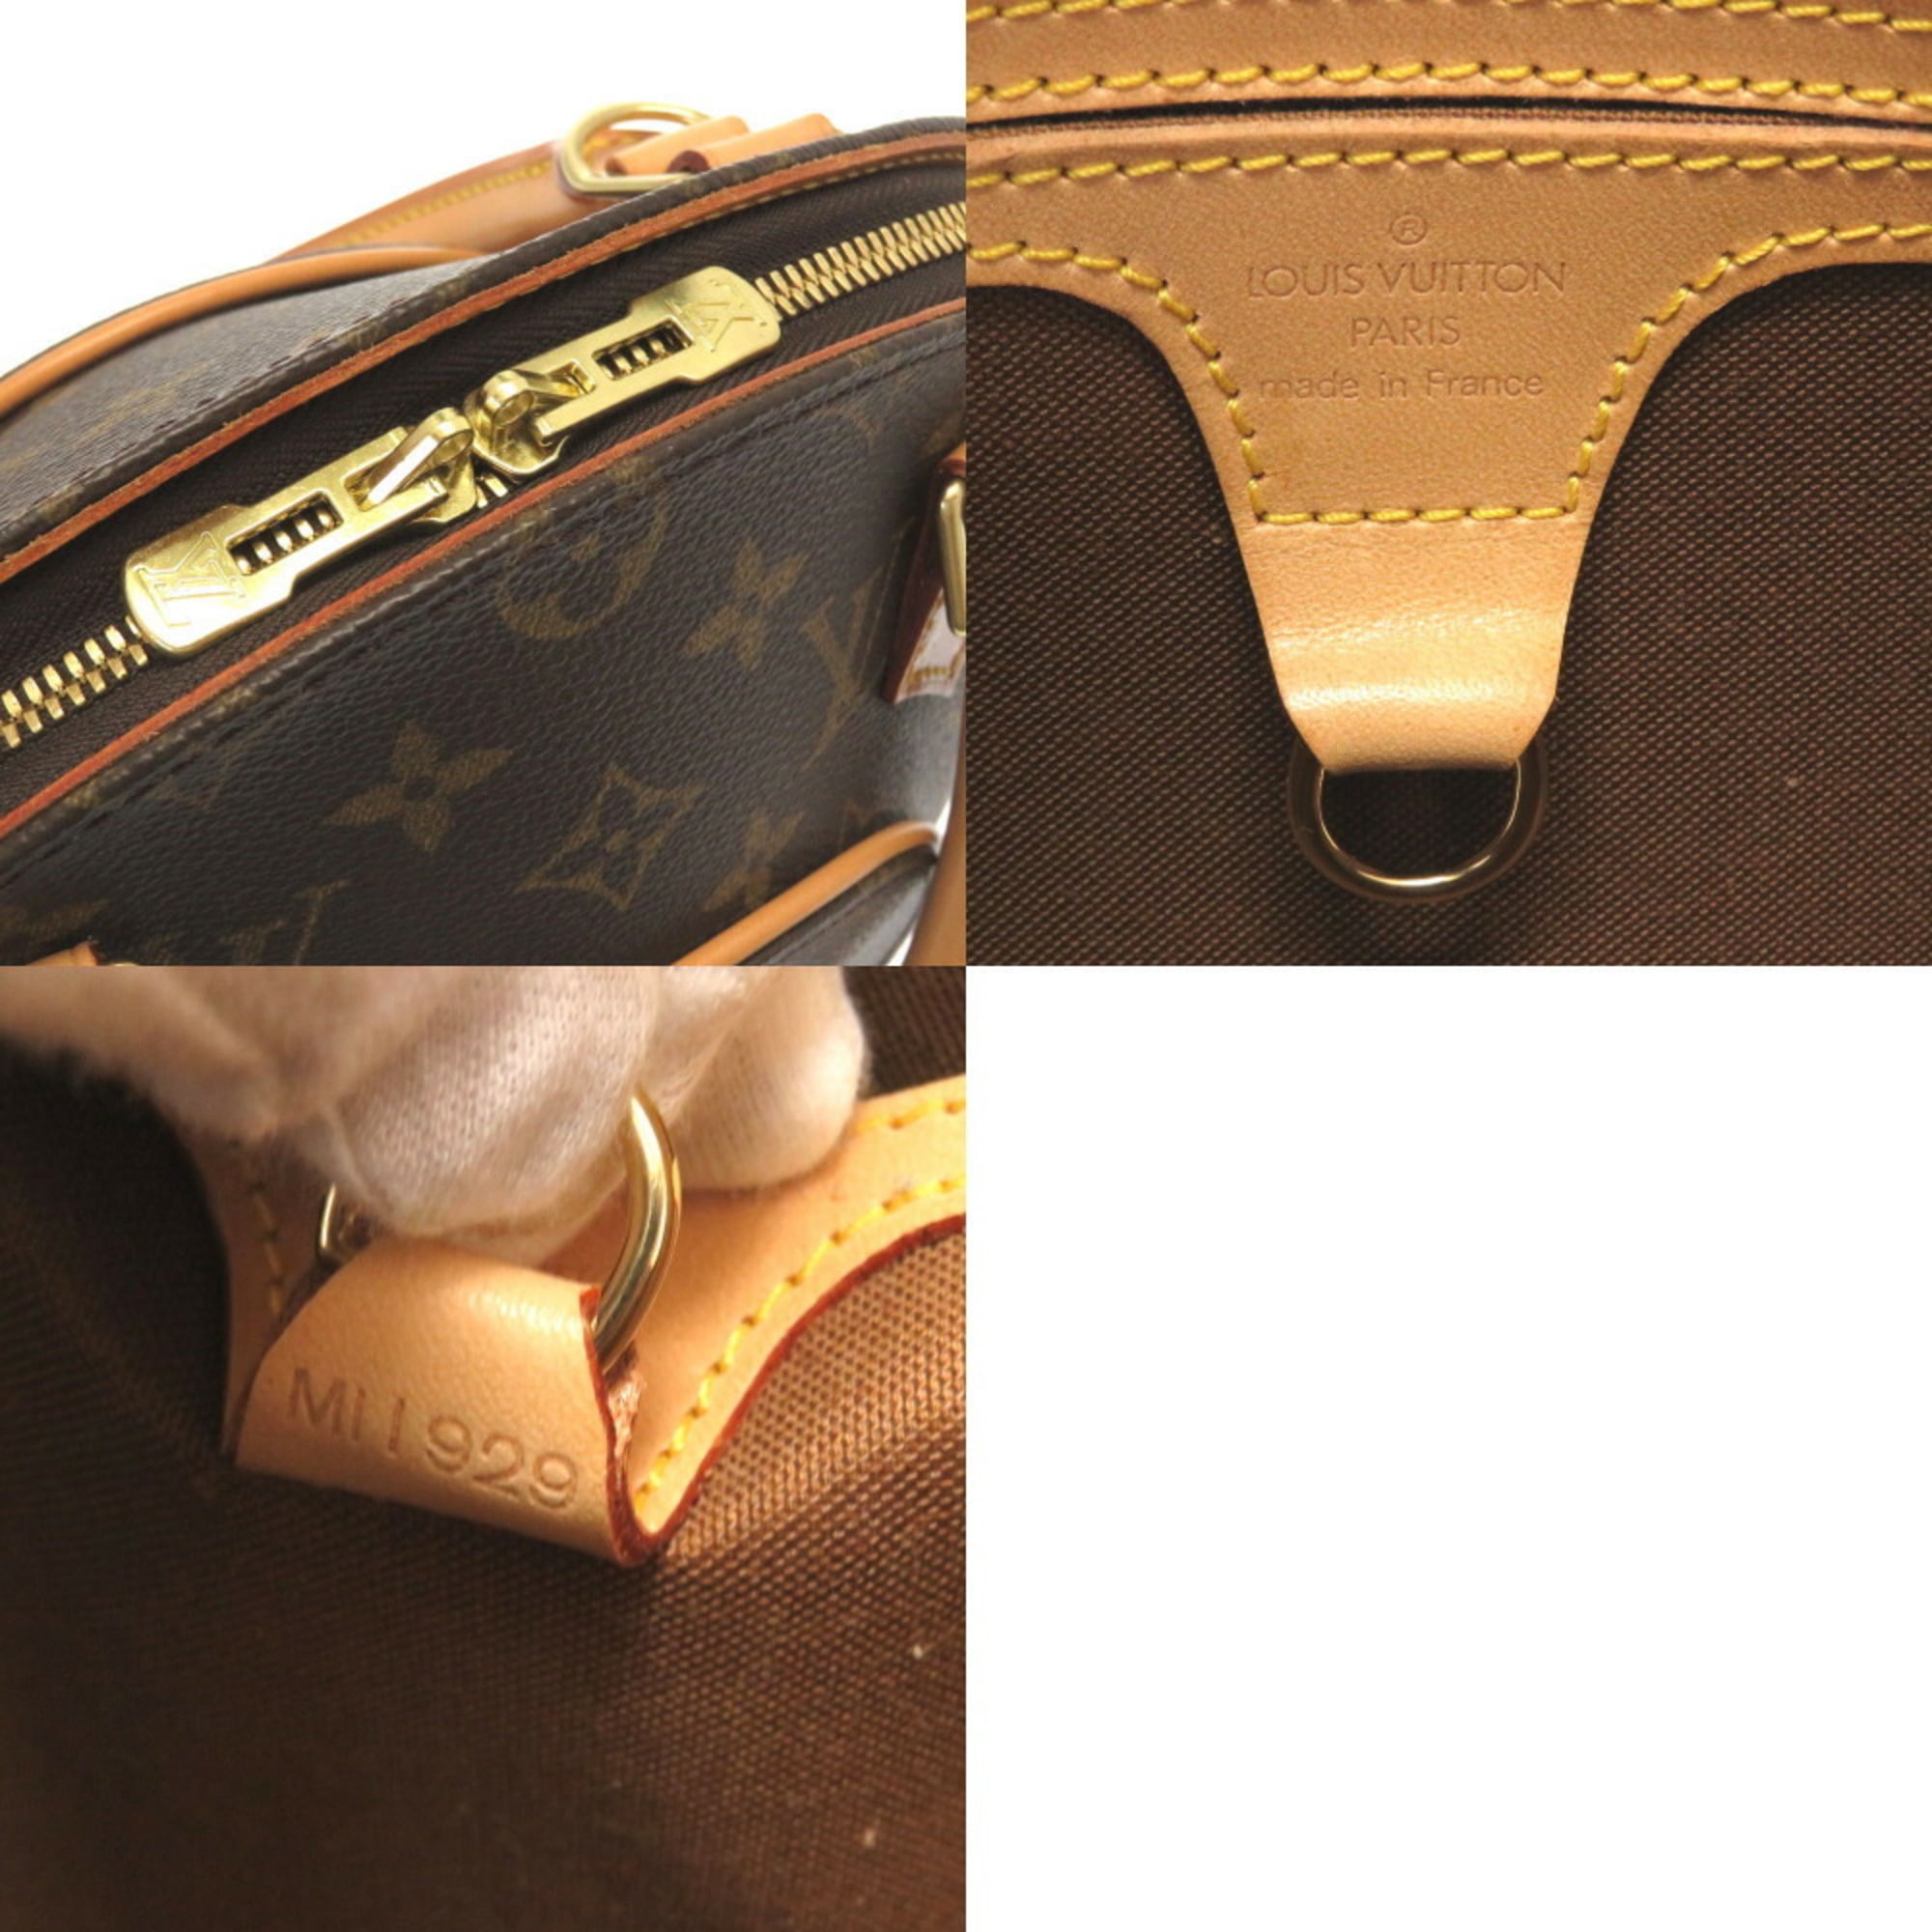 Lot - Louis Vuitton Branded Womens Luxury Handbag - M51127 30cm wide by  26cm high (not including handles)